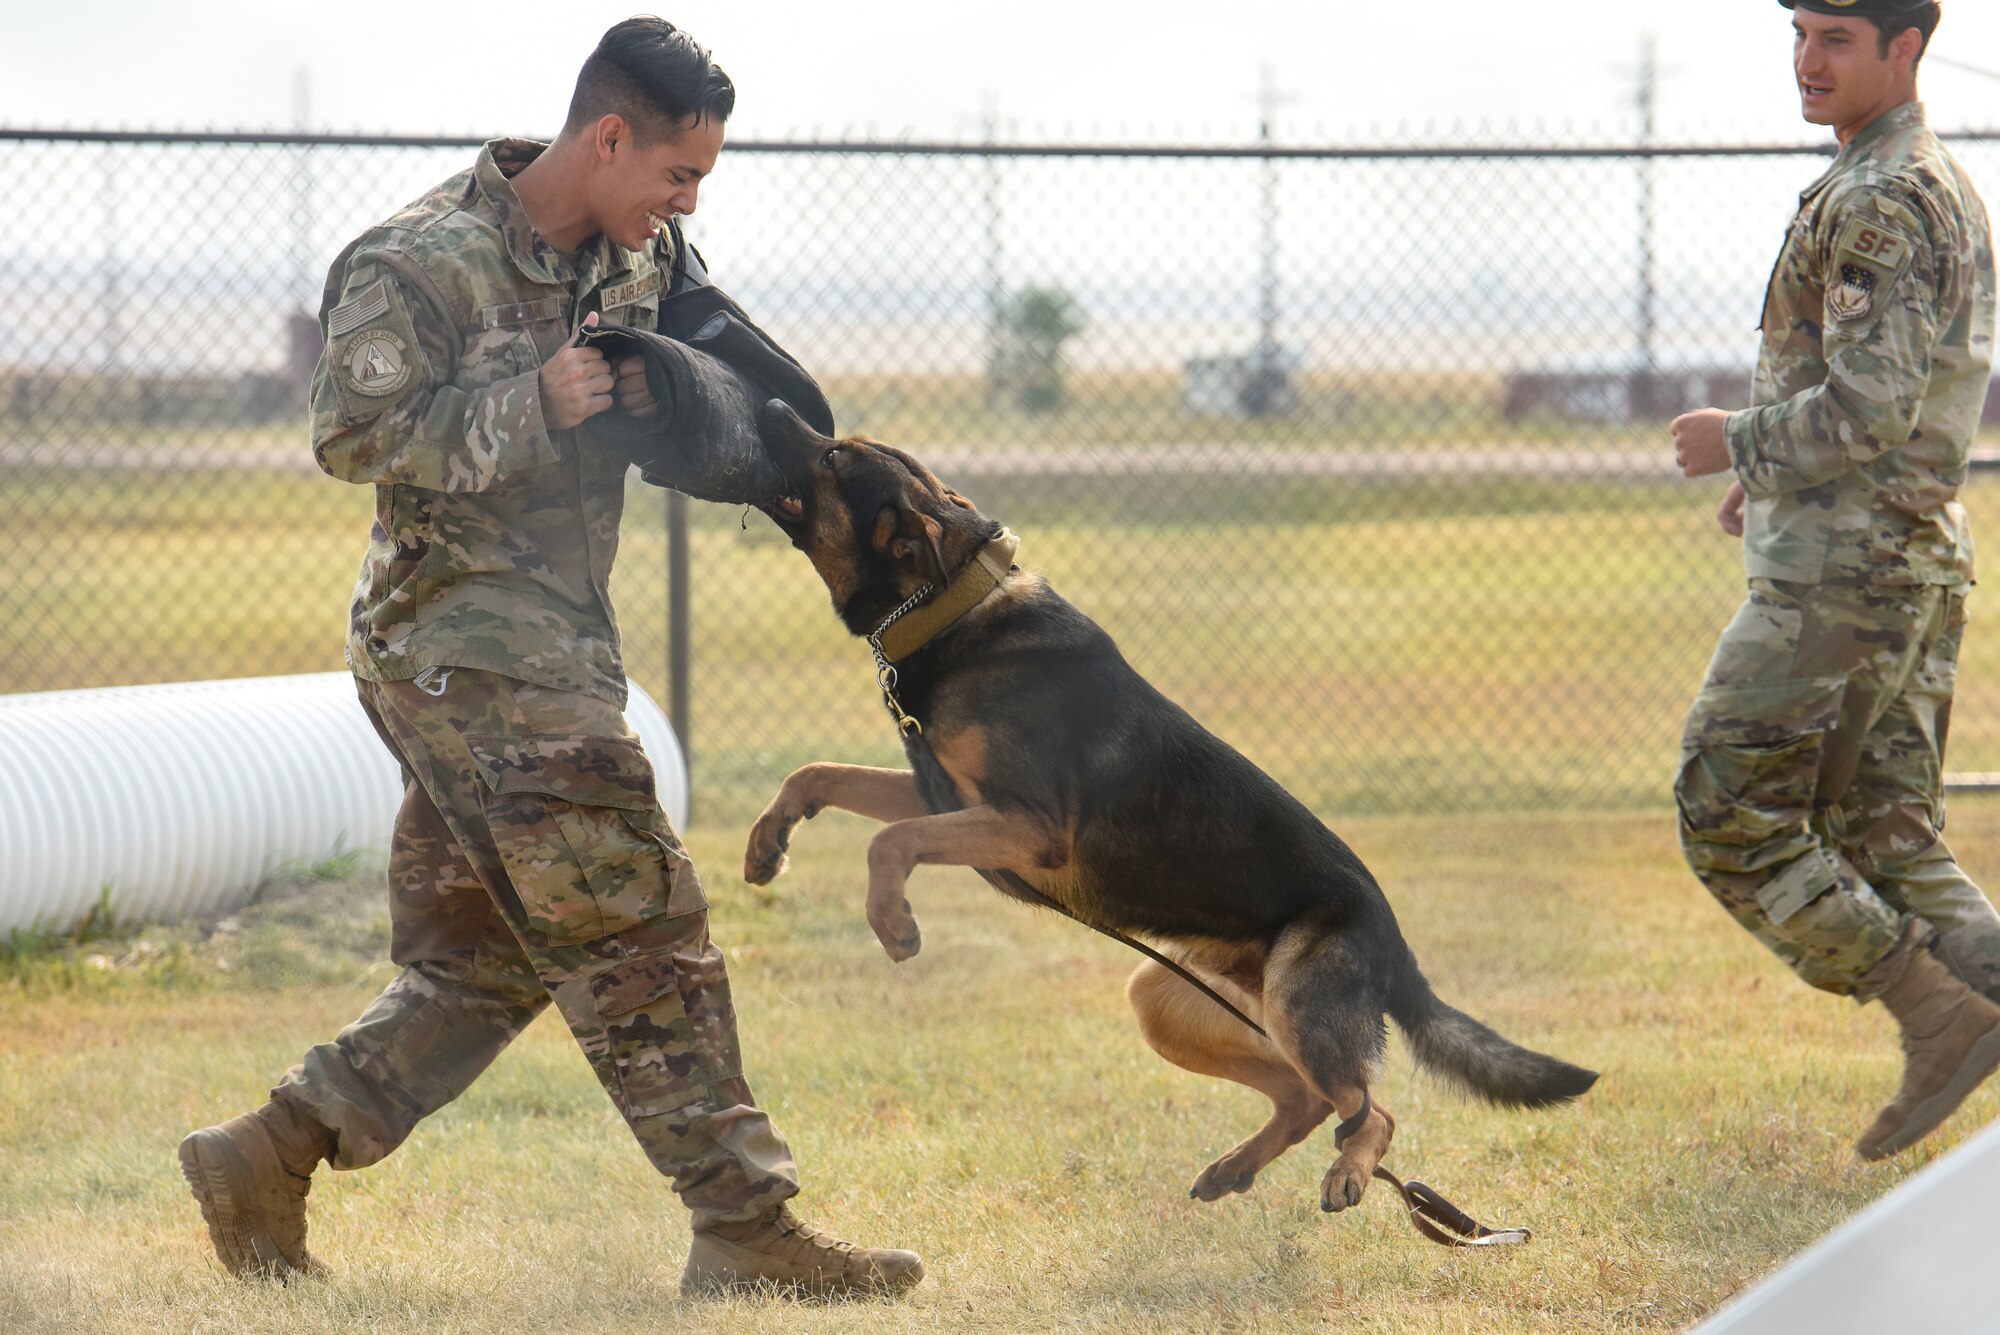 Senior Airman Dustin Sullivan, left, 341st Security Forces Squadron MWD handler, Staff Sgt. Zachary Seroogy, 341st SFS MWD handler, and MWD Paul, practice bite training Aug. 20, 2020, at Malmstrom Air Force Base, Mont.